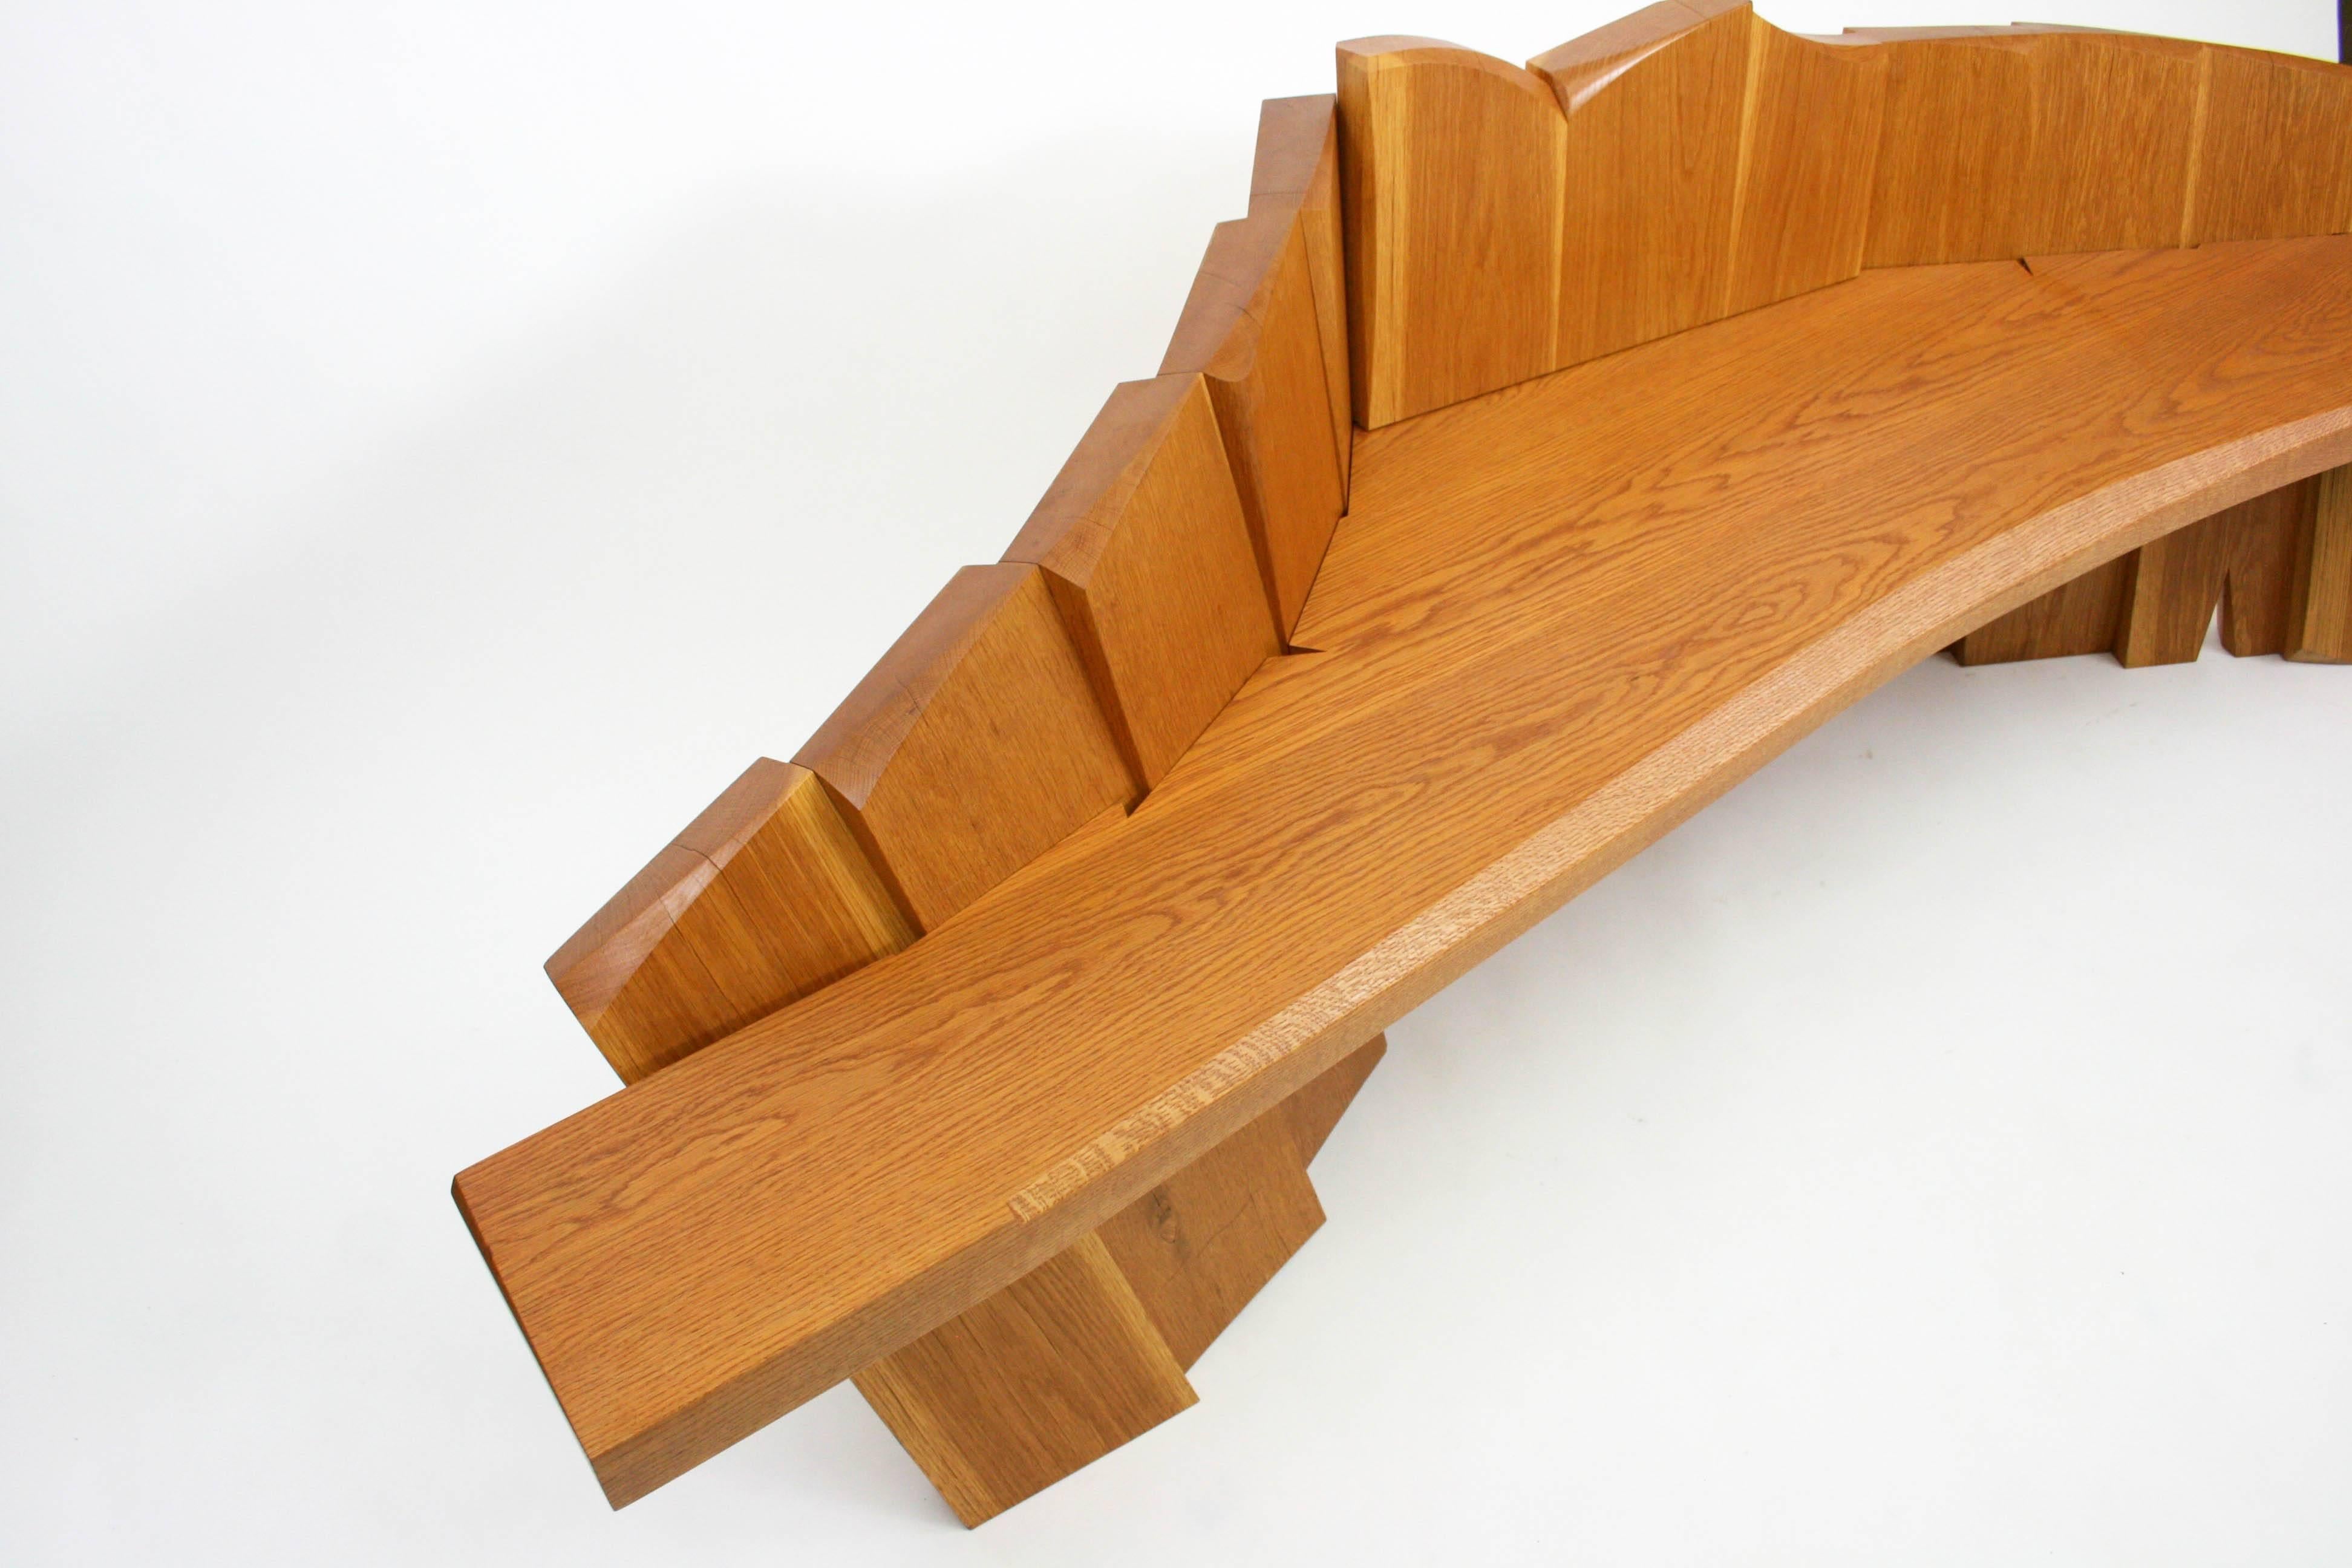 Nico Yektai Studio-Made Sculptural White Oak Bench Signed and Dated by Artist For Sale 3